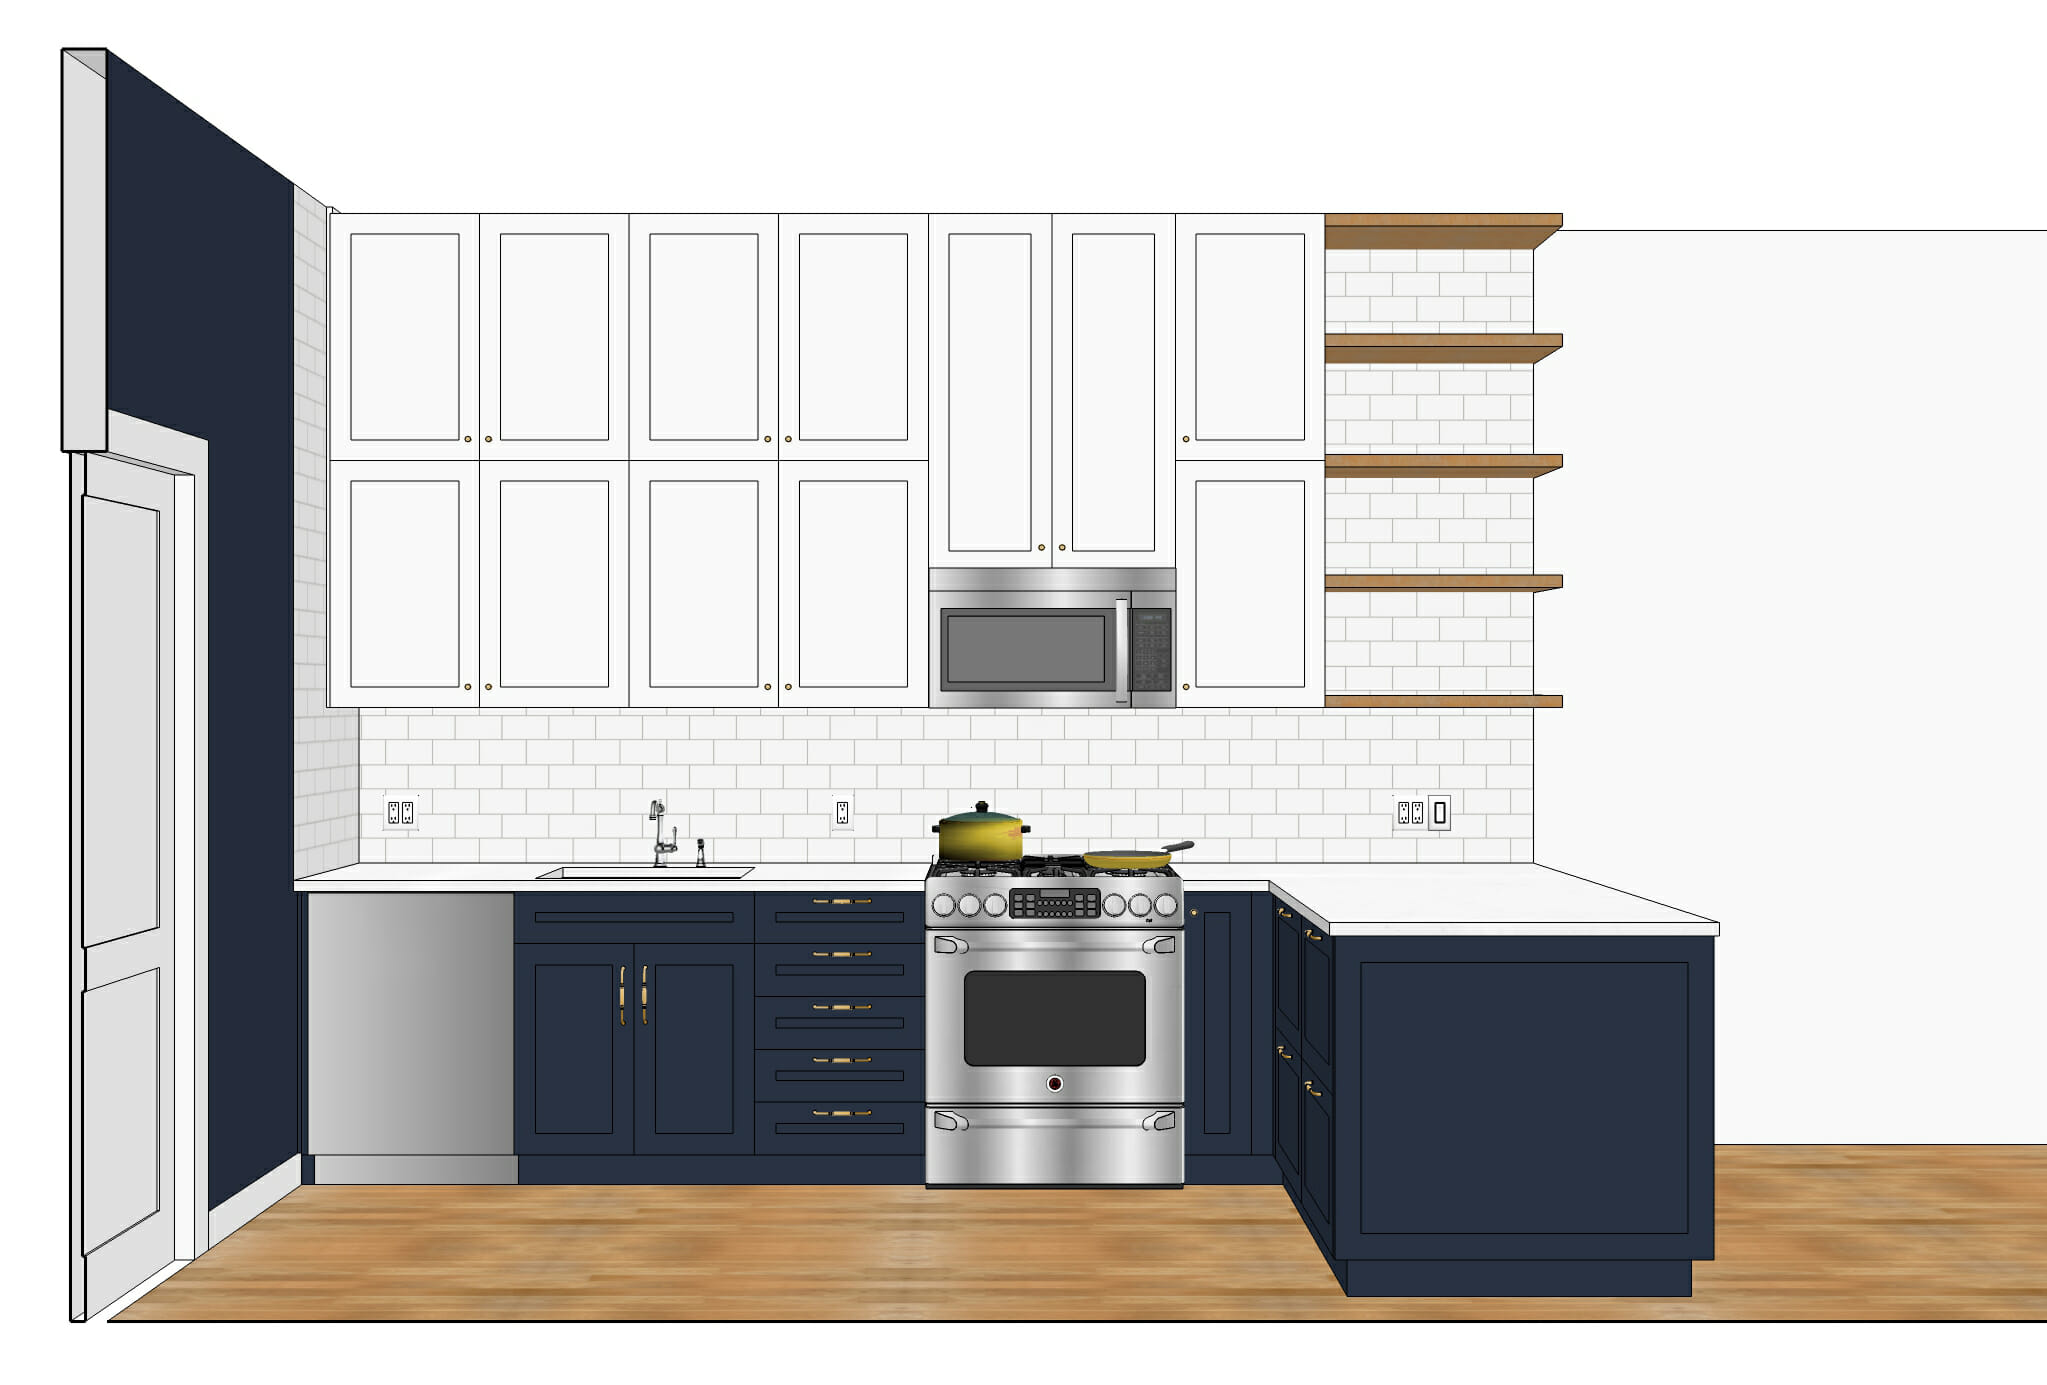 graphic rendering of kitchen with white overhead cabinets and navy blue under counter cabinets and stainless steel cabinets and floating wooden shelves and hardwood floors before renovation